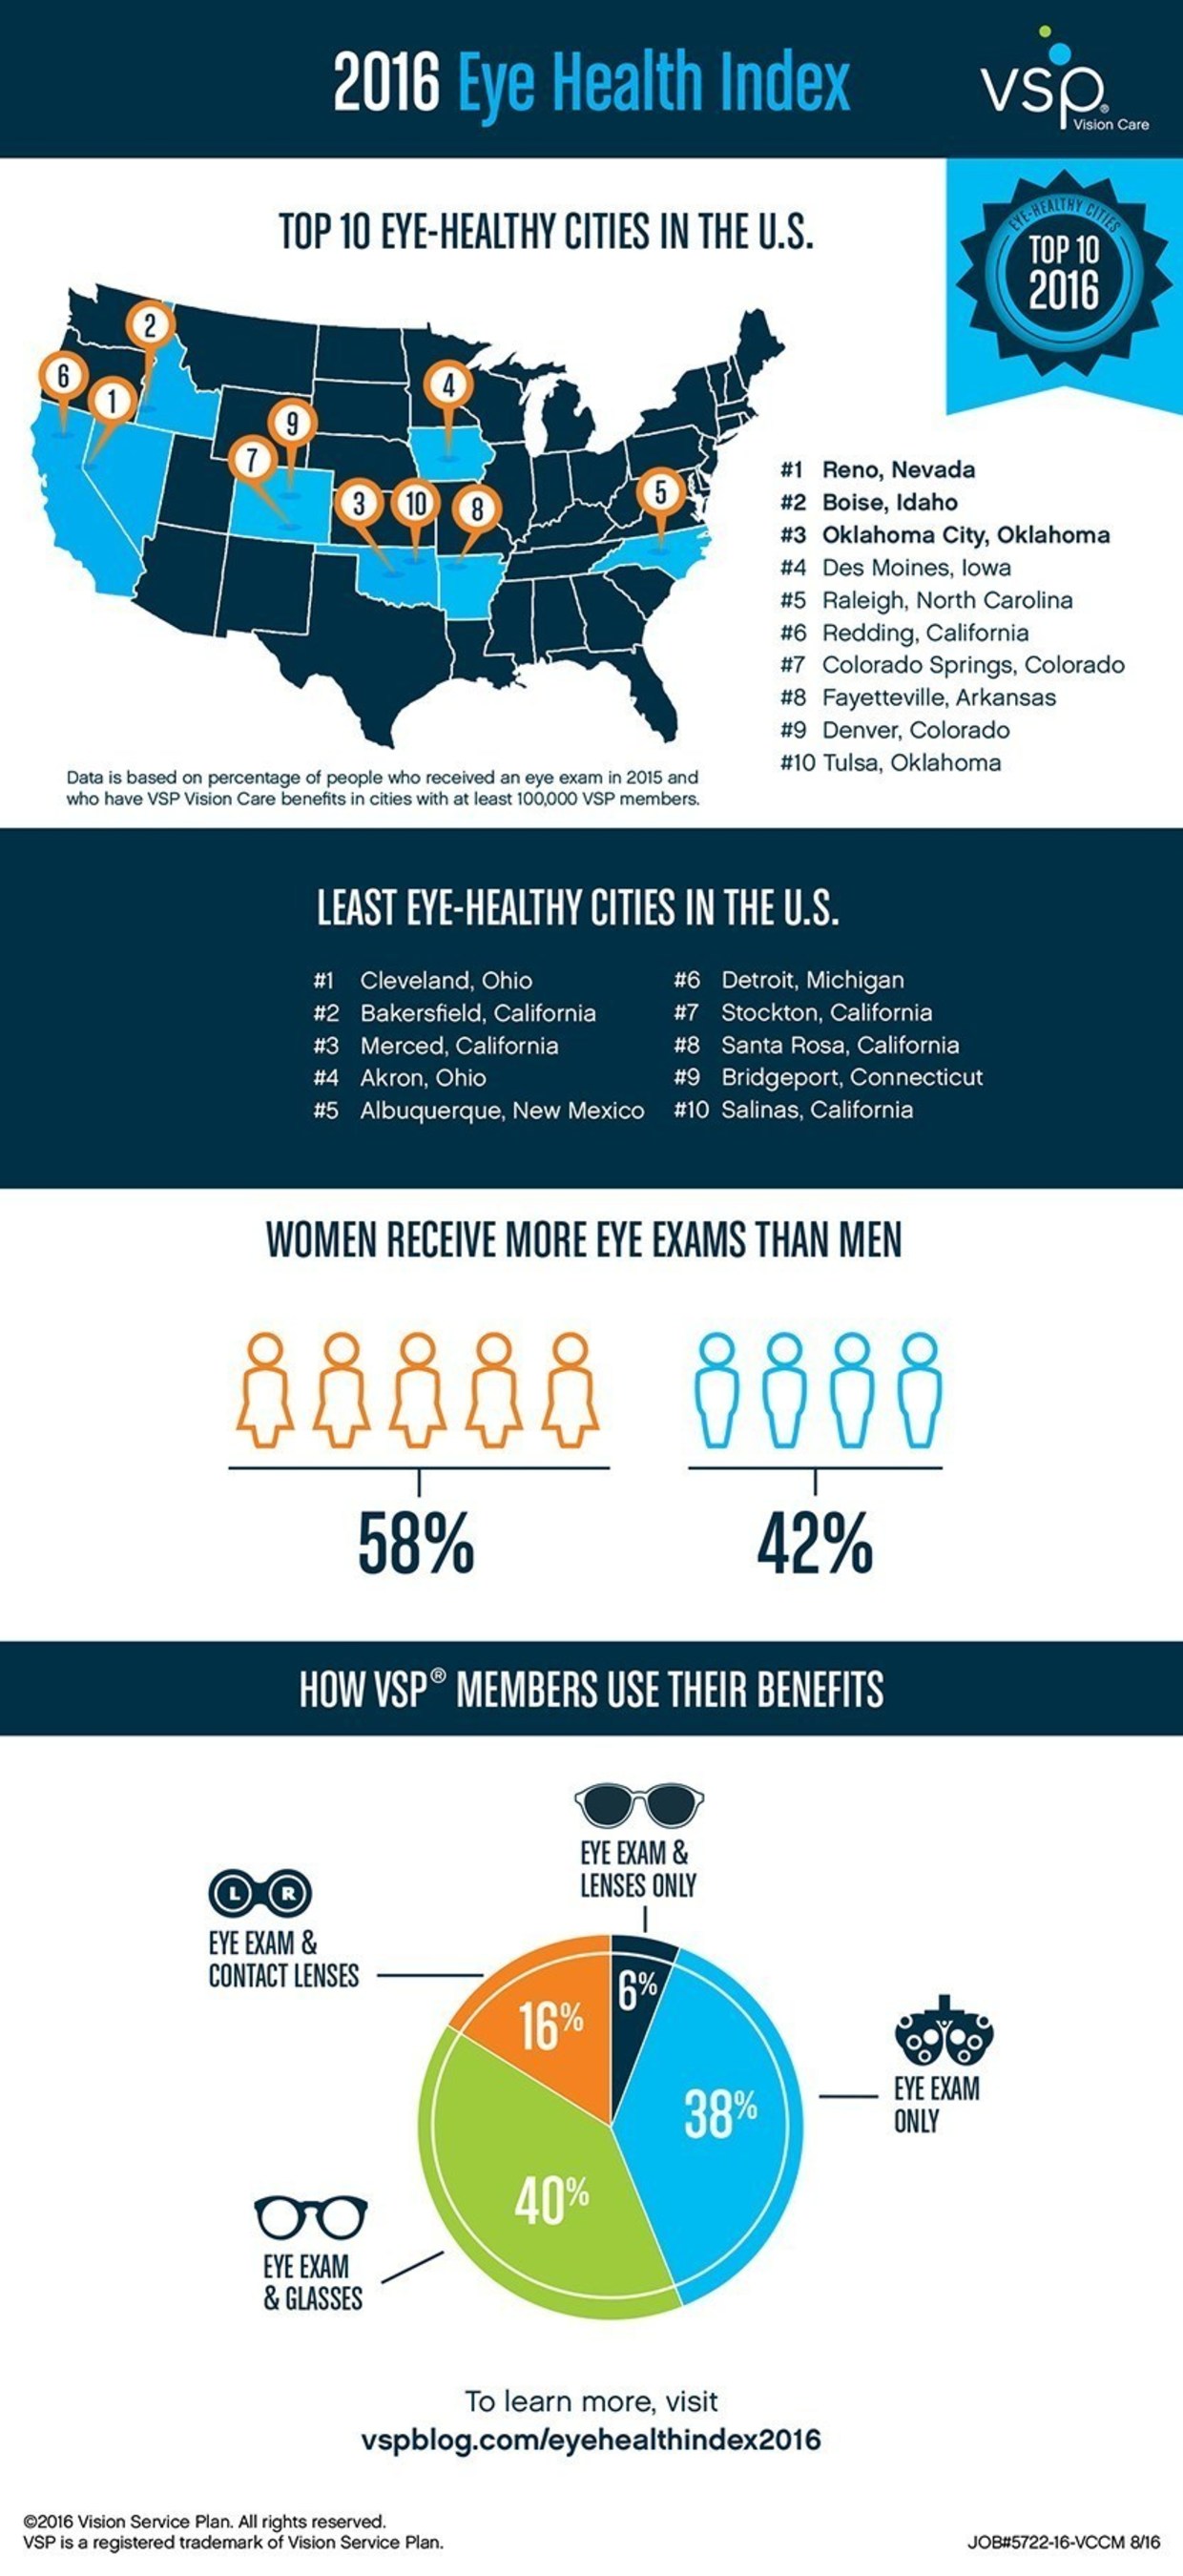 VSP Vision Care's Eye Health Index reveals top 10 most and least eye-healthy cities in the United States.